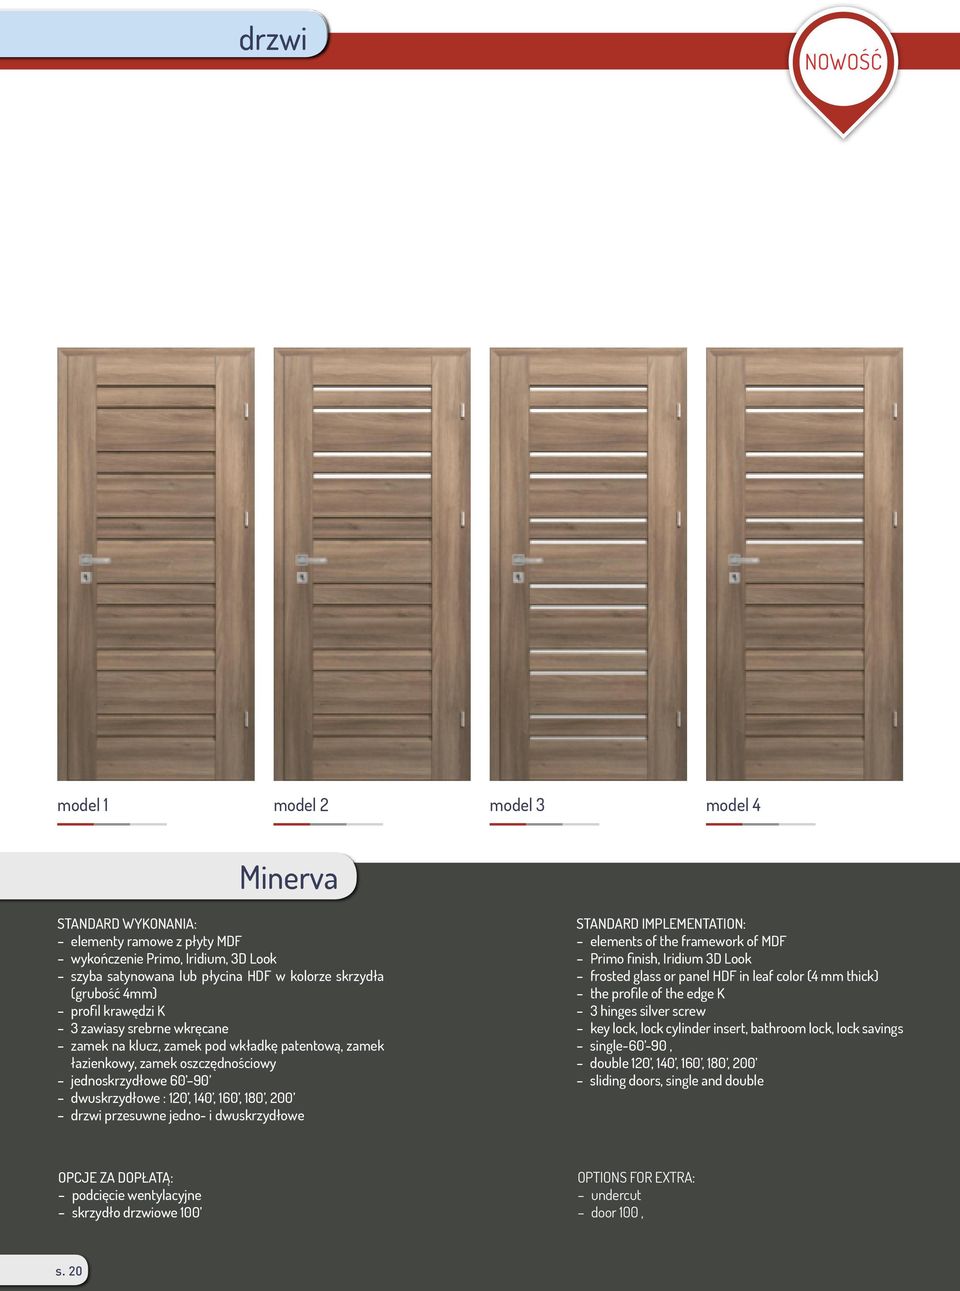 drzwi przesuwne jedno- i dwuskrzydłowe STANDARD IMPLEMENTATION: elements of the framework of MDF Primo finish, Iridium 3D Look frosted glass or panel HDF in leaf color (4 mm thick) the profile of the